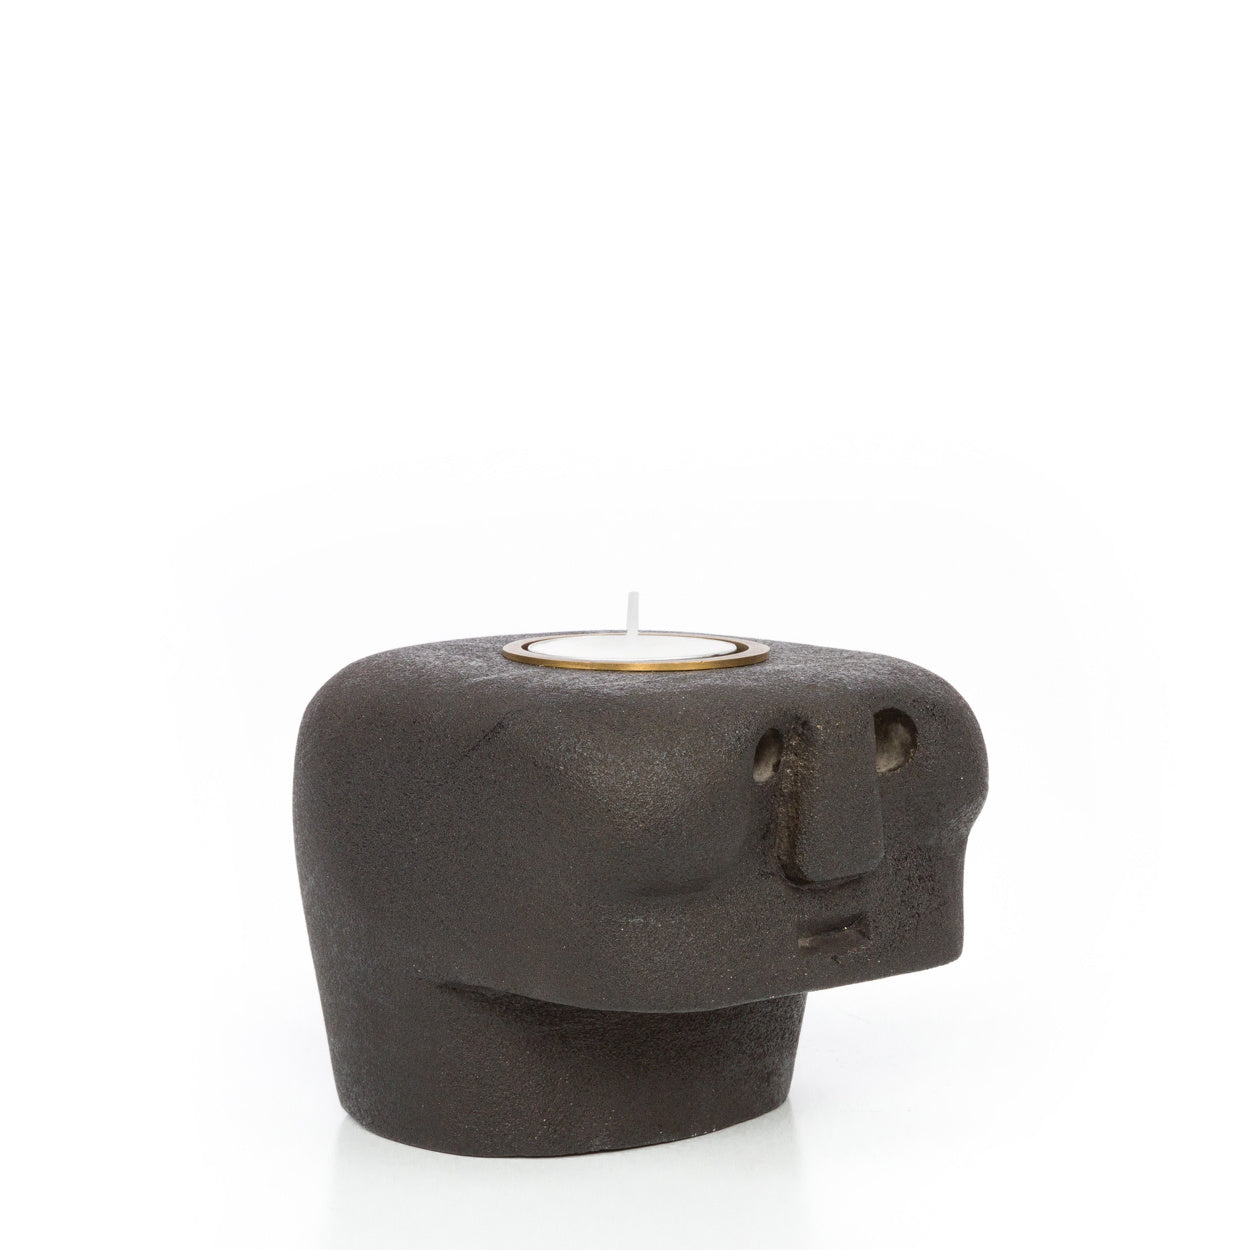 THE SUMBA STONE Candle Holder half-side view